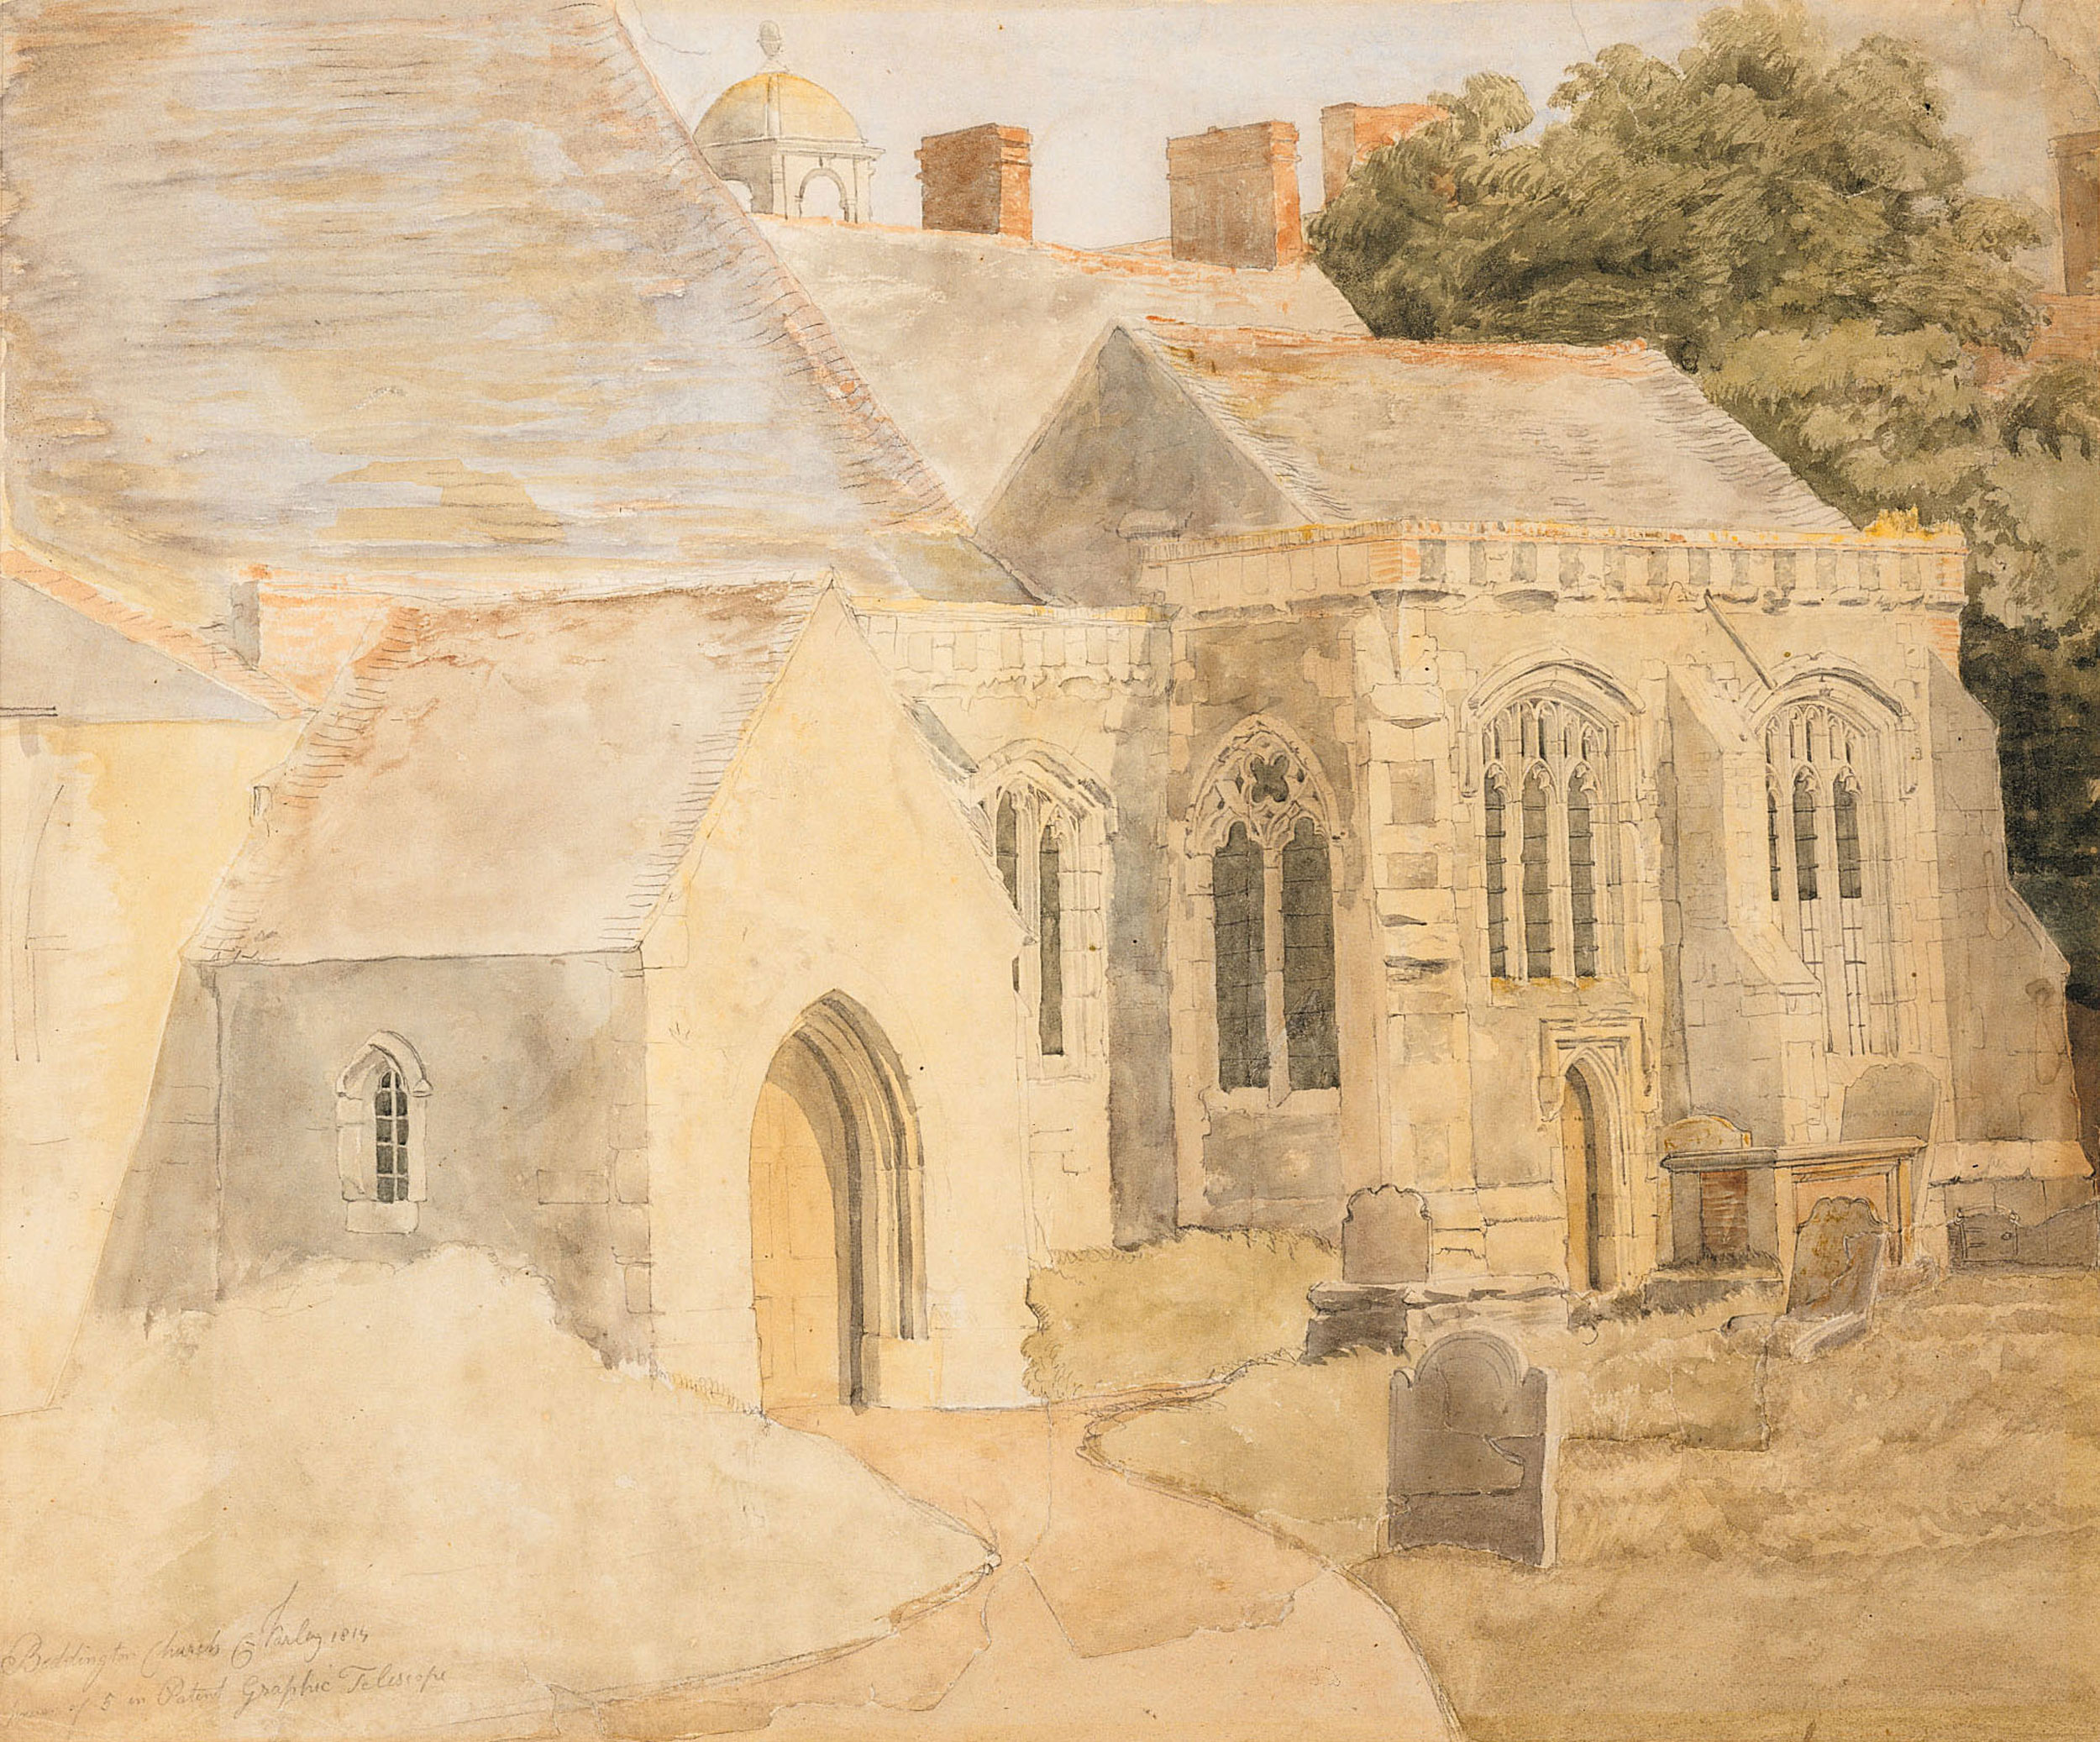  St. Mary's Abbey, Beddington (1814). Made with Varley’s Patent Graphic Telescope with a magnification power of 5. 